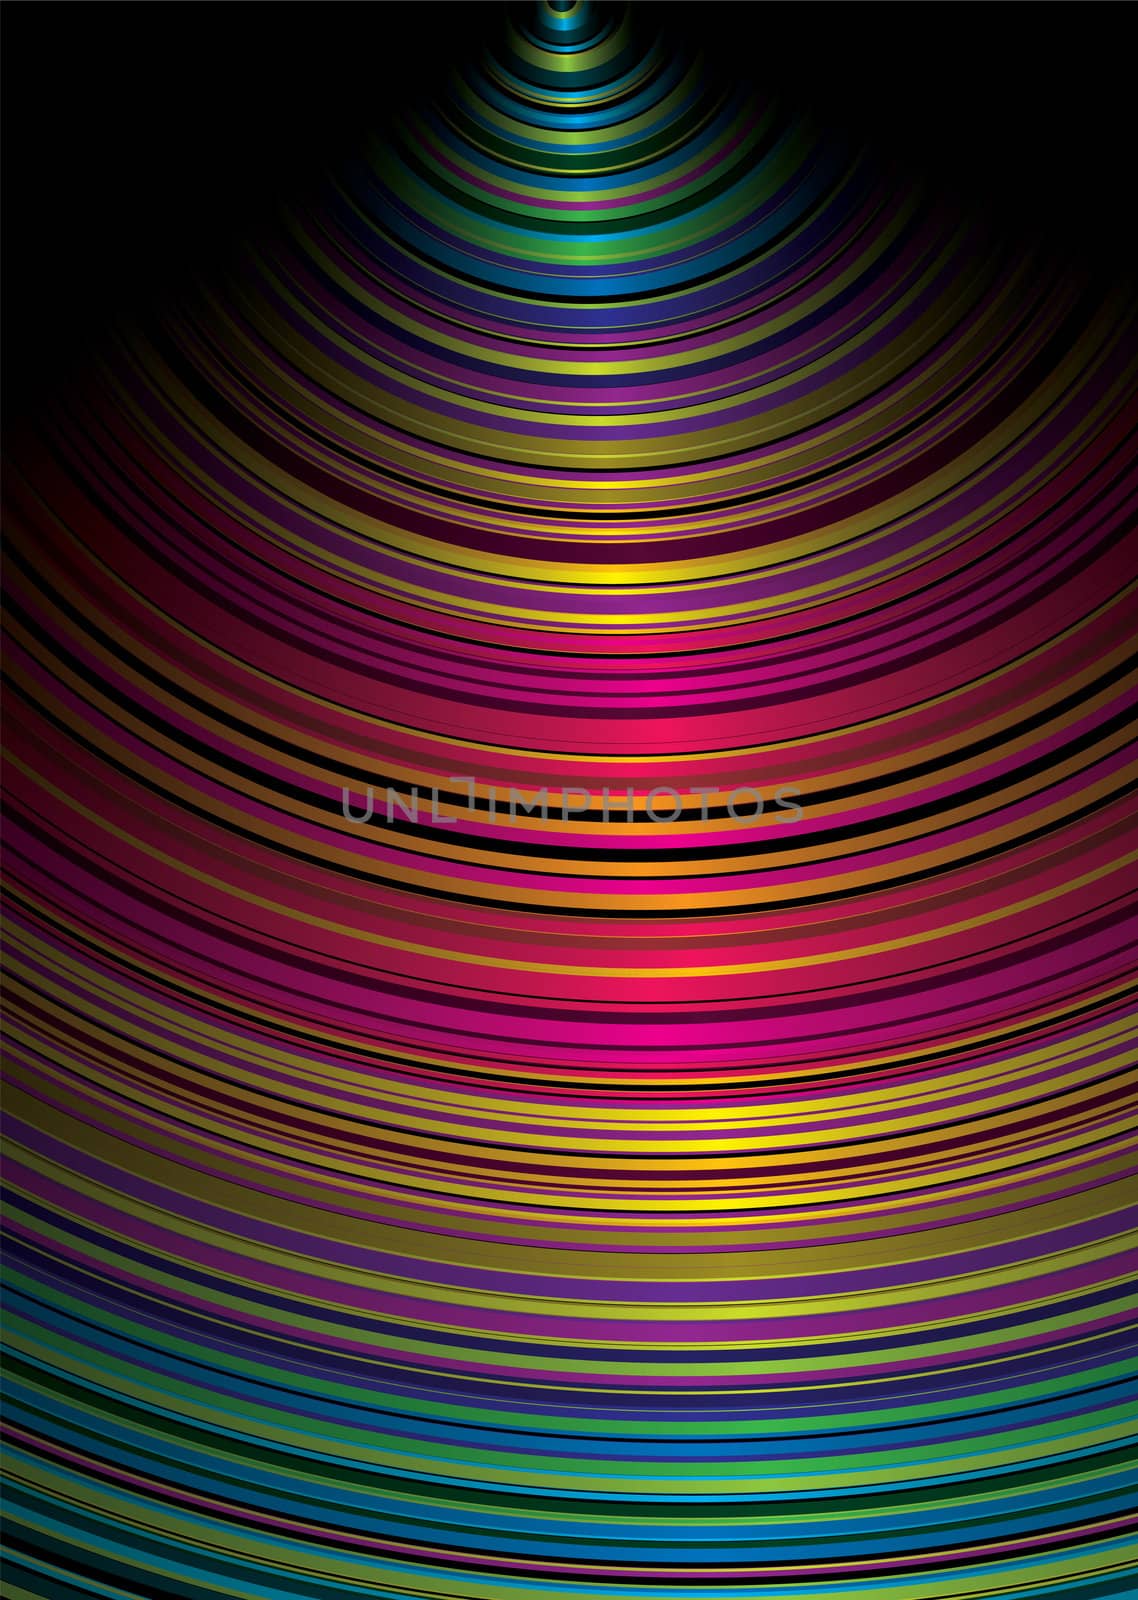 Brightly coloured rainbow background with a circular design